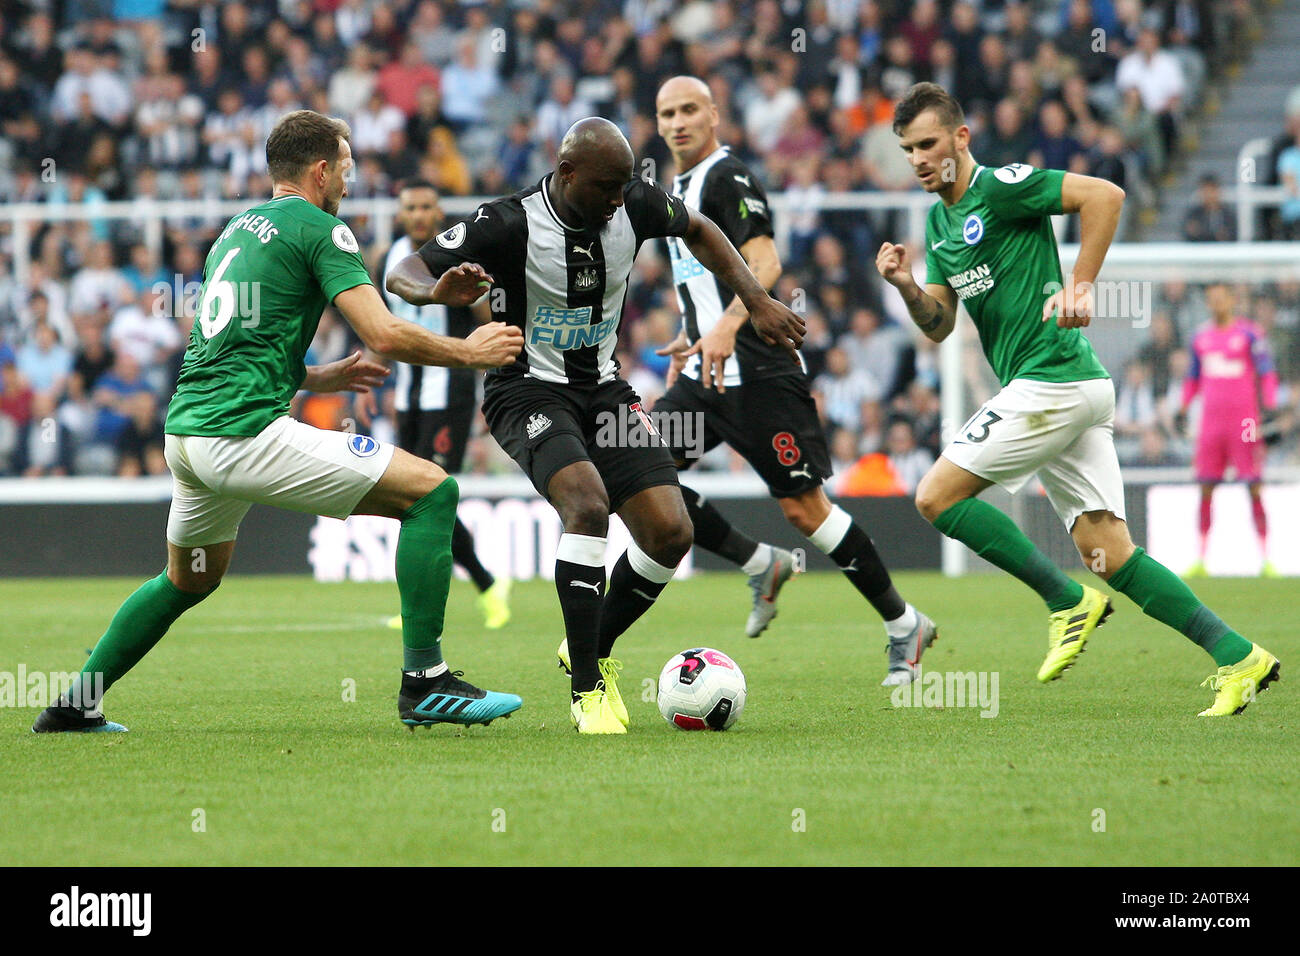 Newcastle, UK. 21st Sep, 2019.  Newcastle United's Jetro Willems competes for the ball with Brighton & Hove Albion's Dale Stephens during the Premier League match between Newcastle United and Brighton and Hove Albion at St. James's Park, Newcastle on Saturday 21st September 2019. (Credit: Steven Hadlow | MI News)Photograph may only be used for newspaper and/or magazine editorial purposes, license required for commercial use Credit: MI News & Sport /Alamy Live News Stock Photo